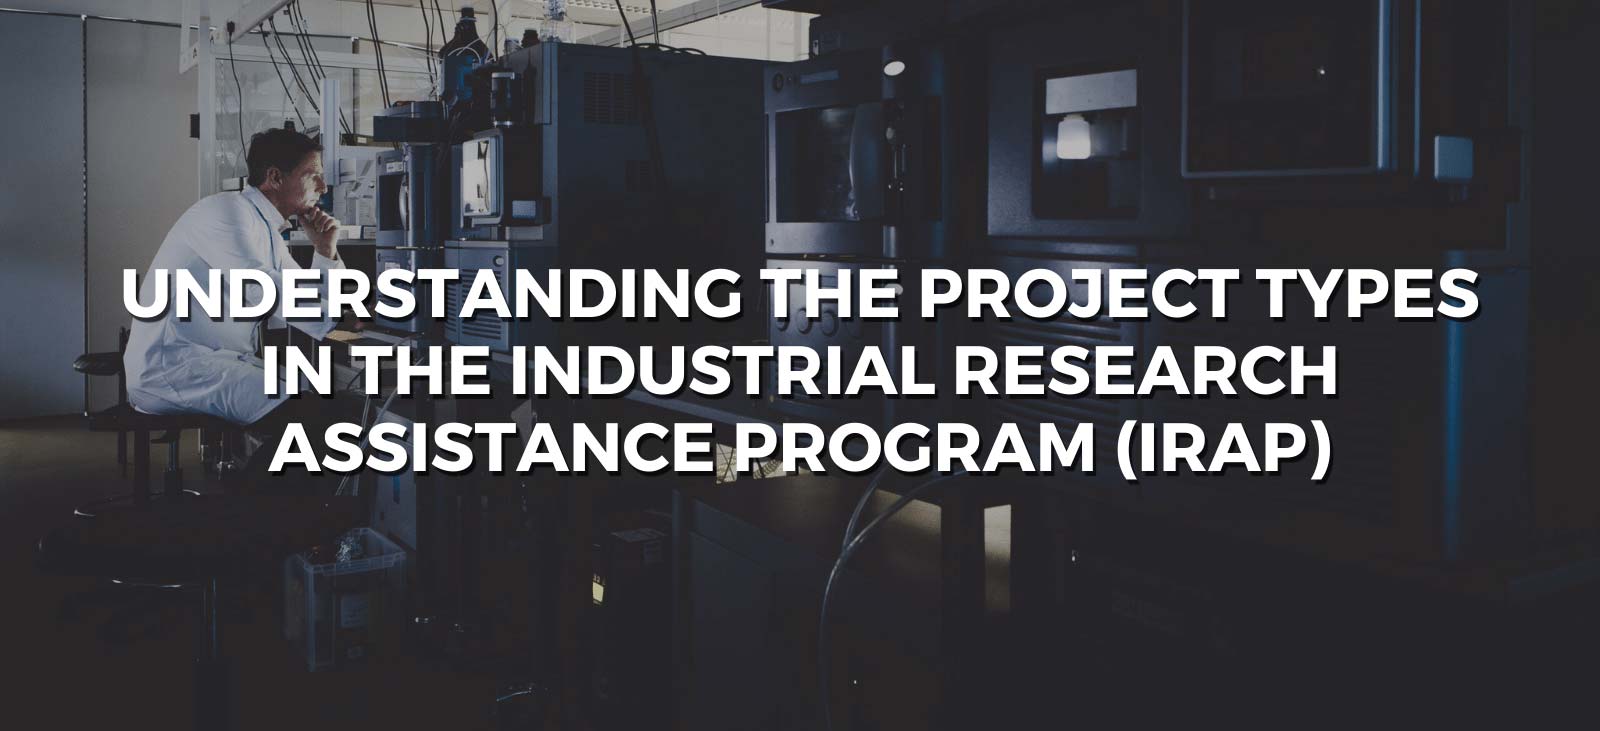 understanding the project types in the industrial research assistance program